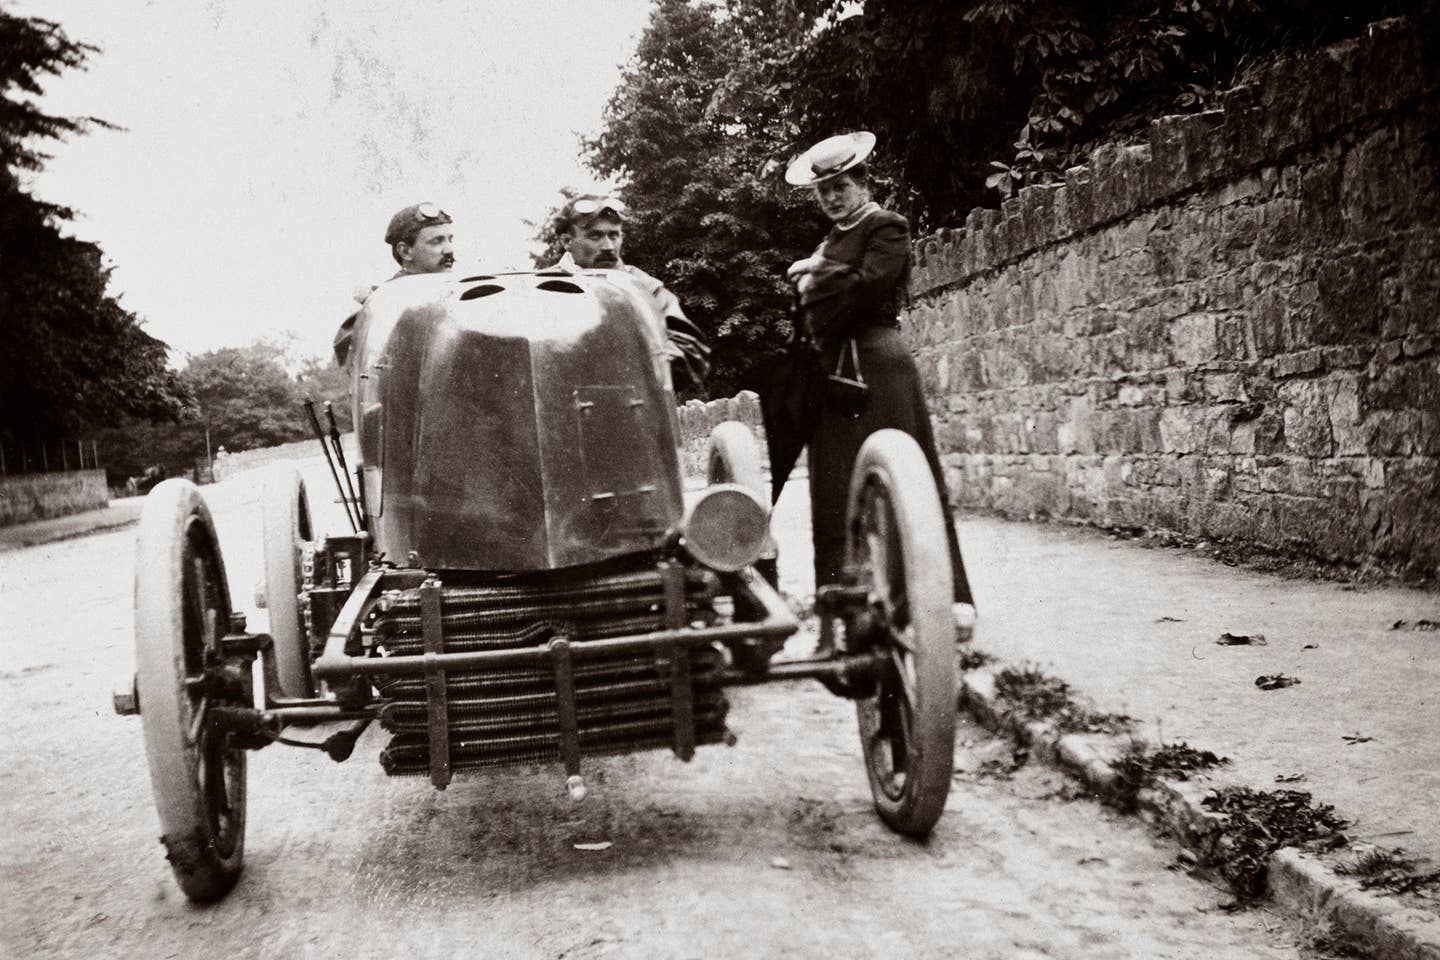 One of Mors' entrants in the 1903 race. <em>Getty Images</em>